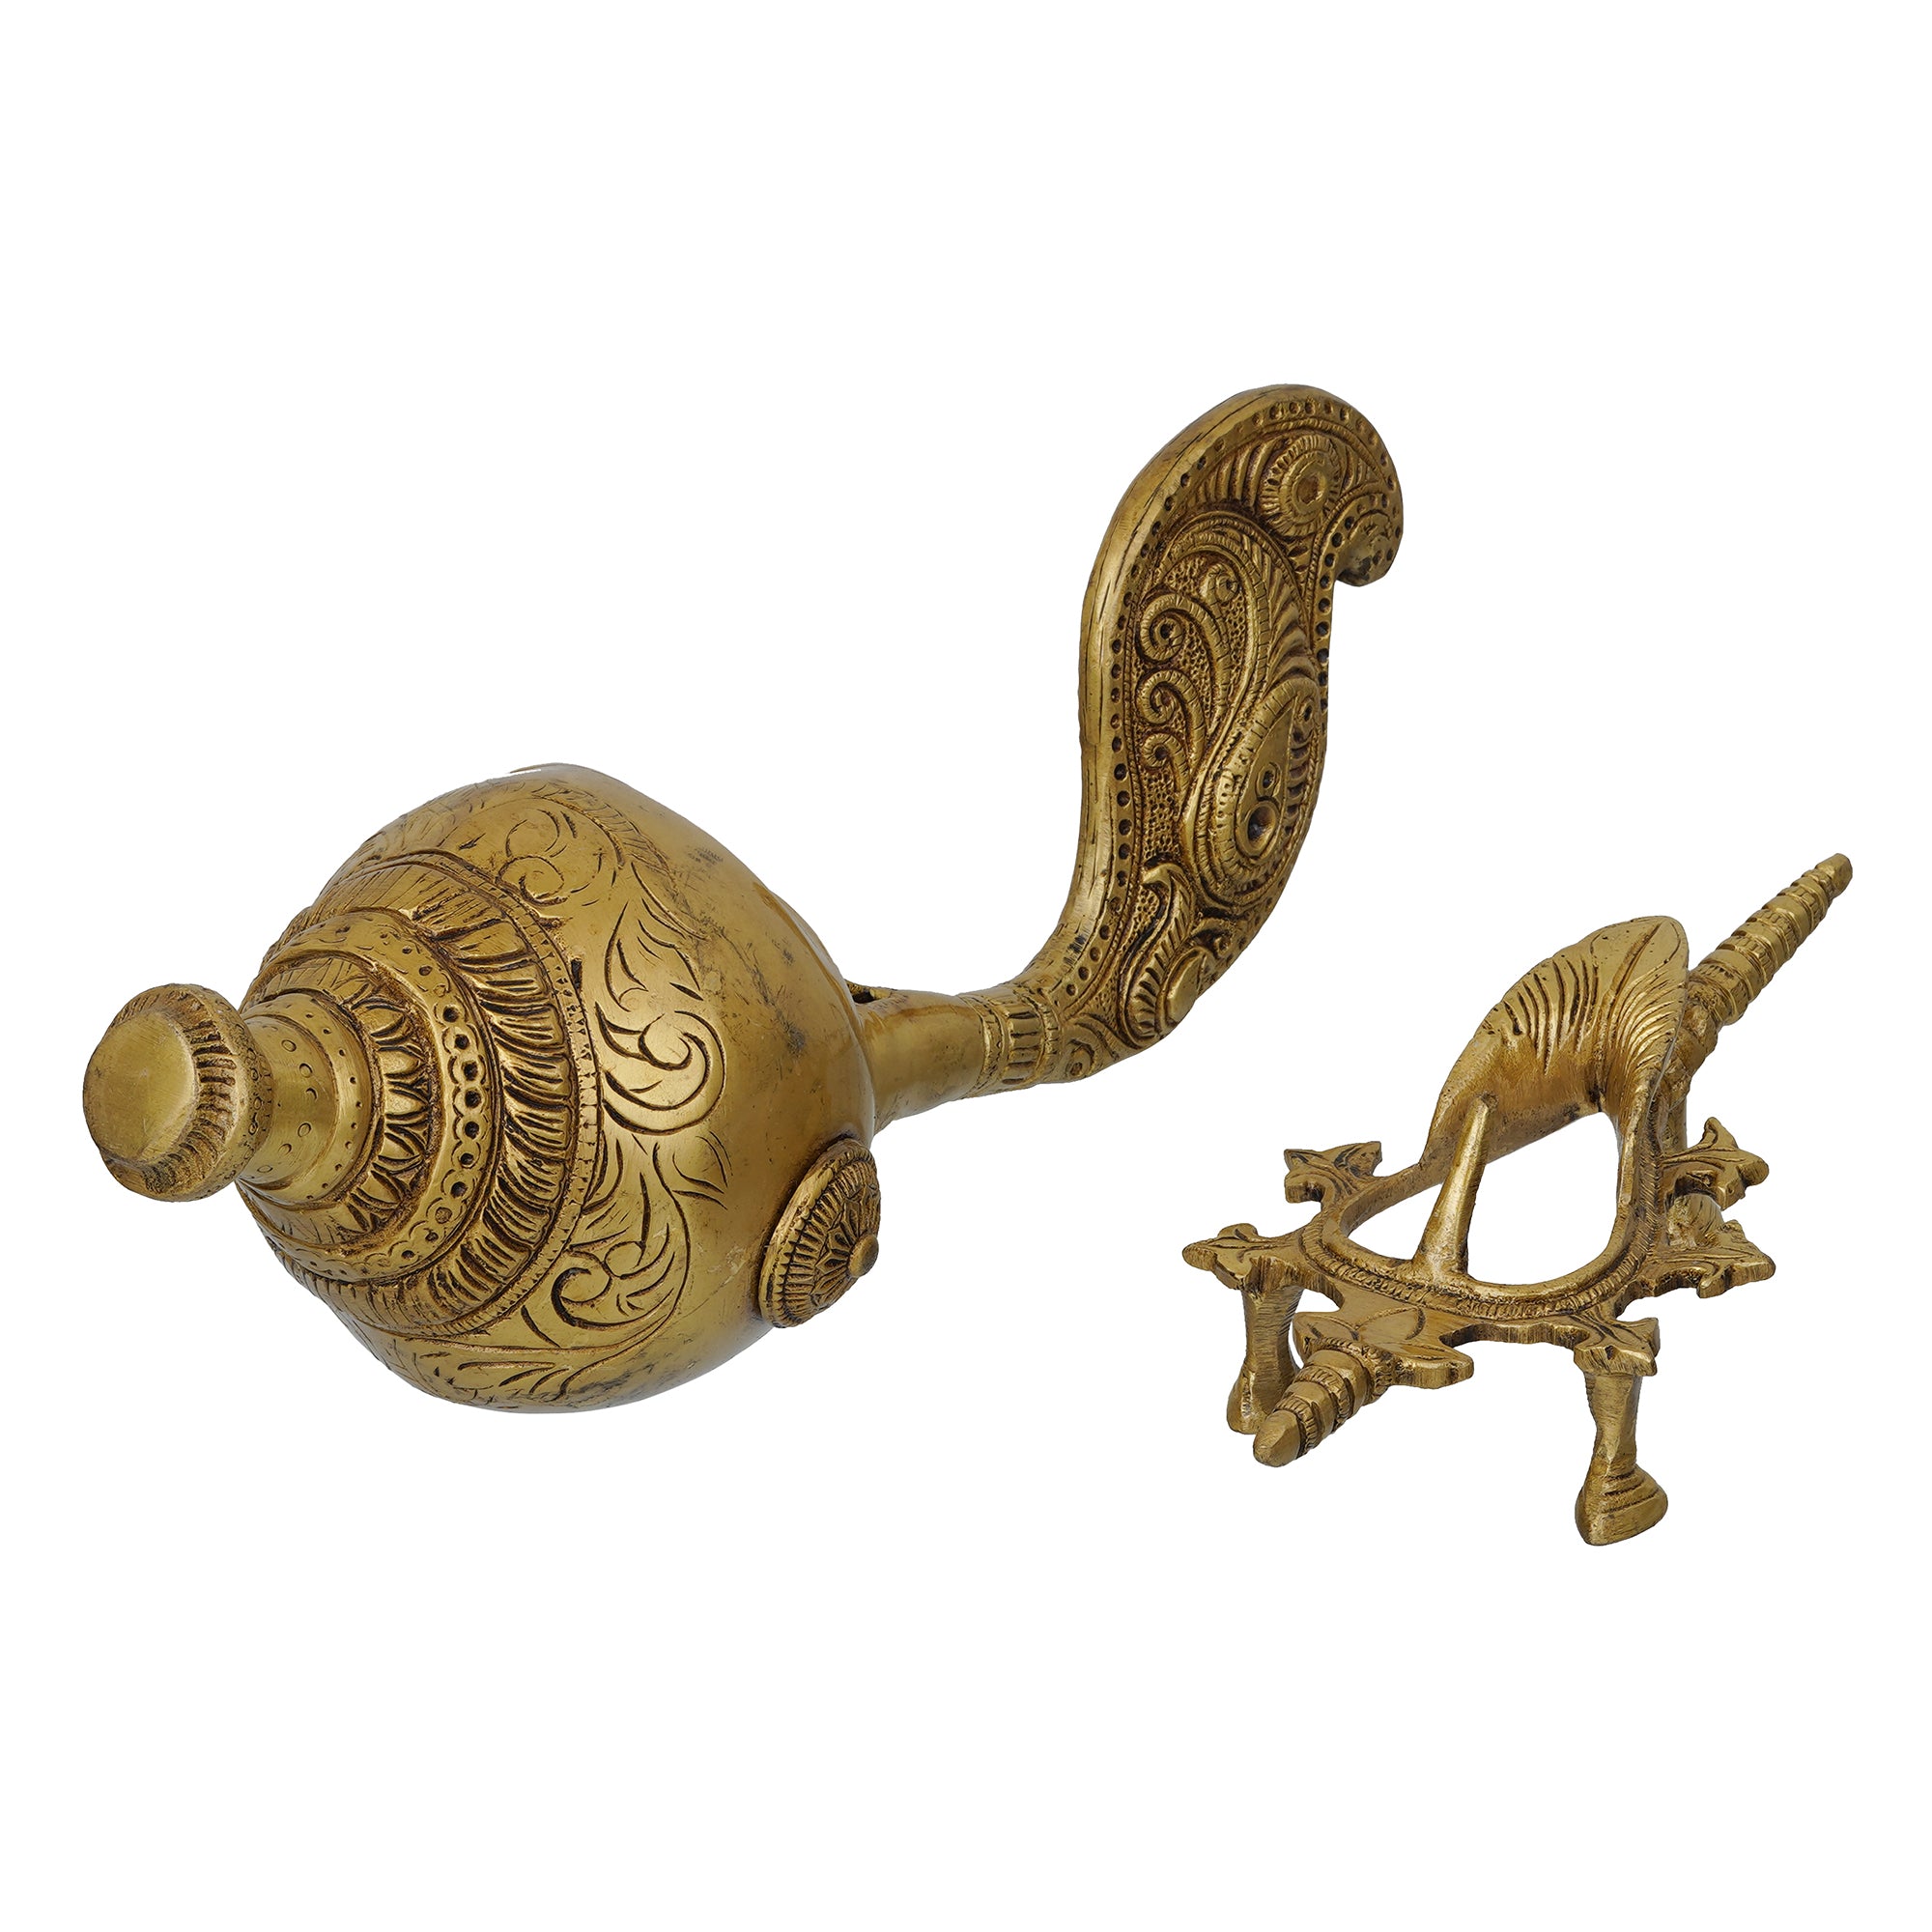 Golden Shankh (Conch) with a Stand Decorative Handcrafted Brass Showpiece 4